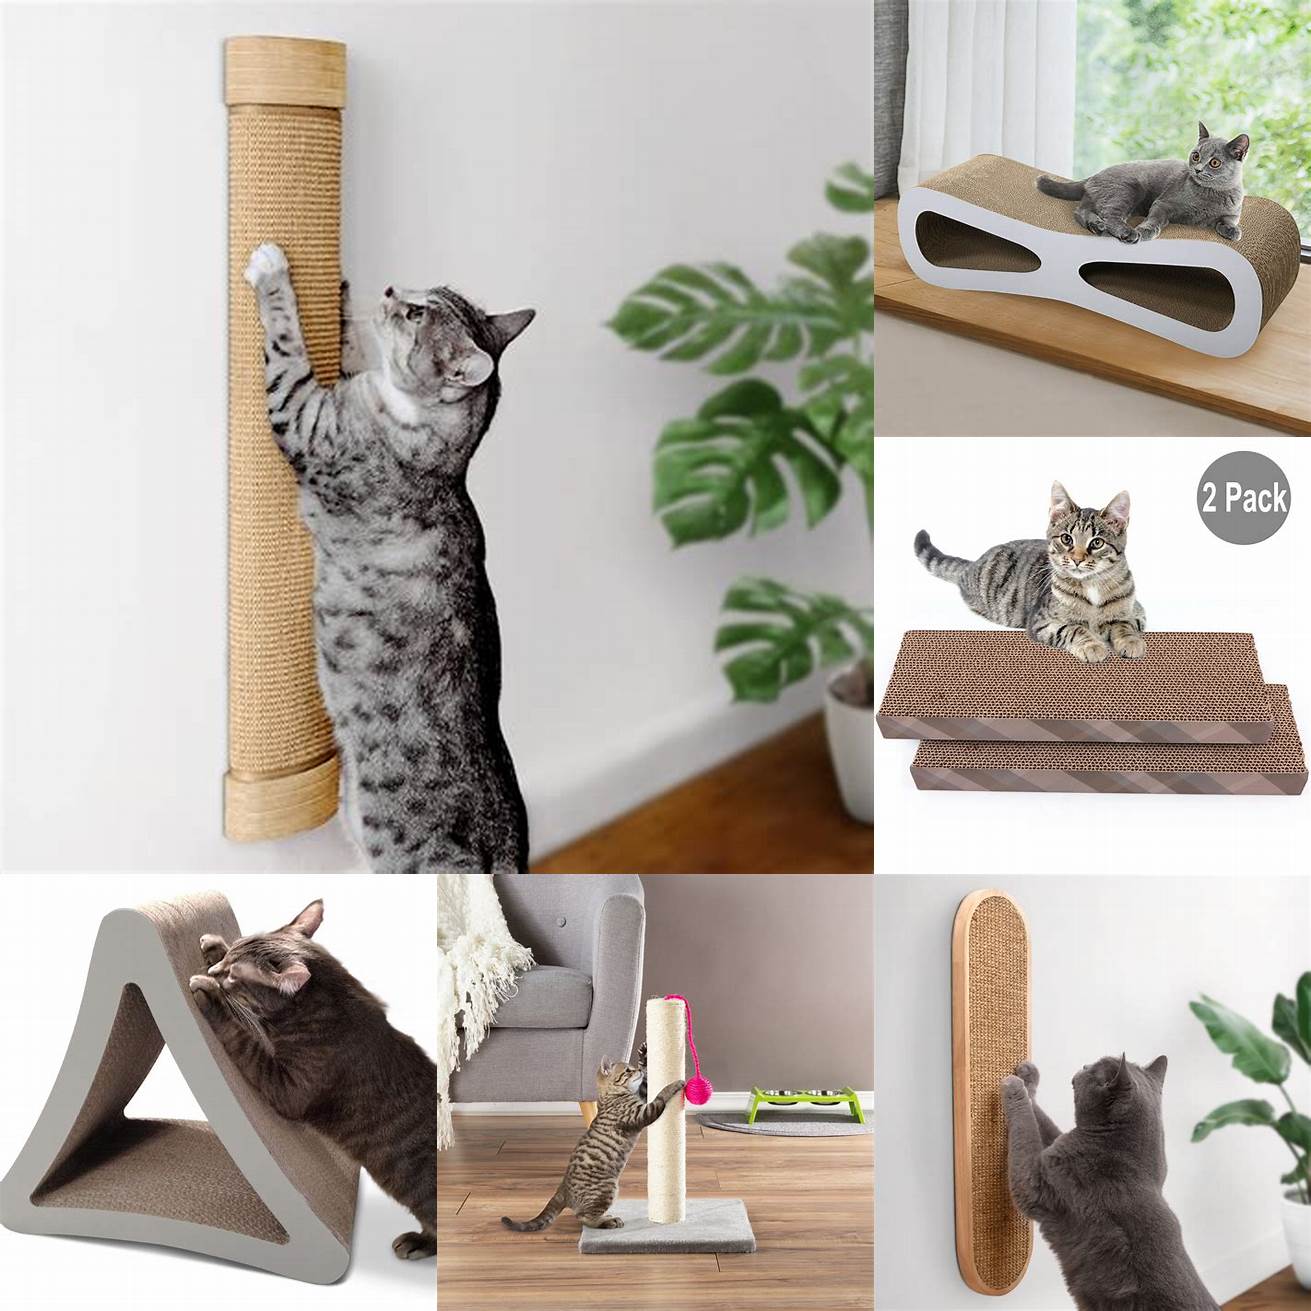 Provide your cat with scratching posts and pads